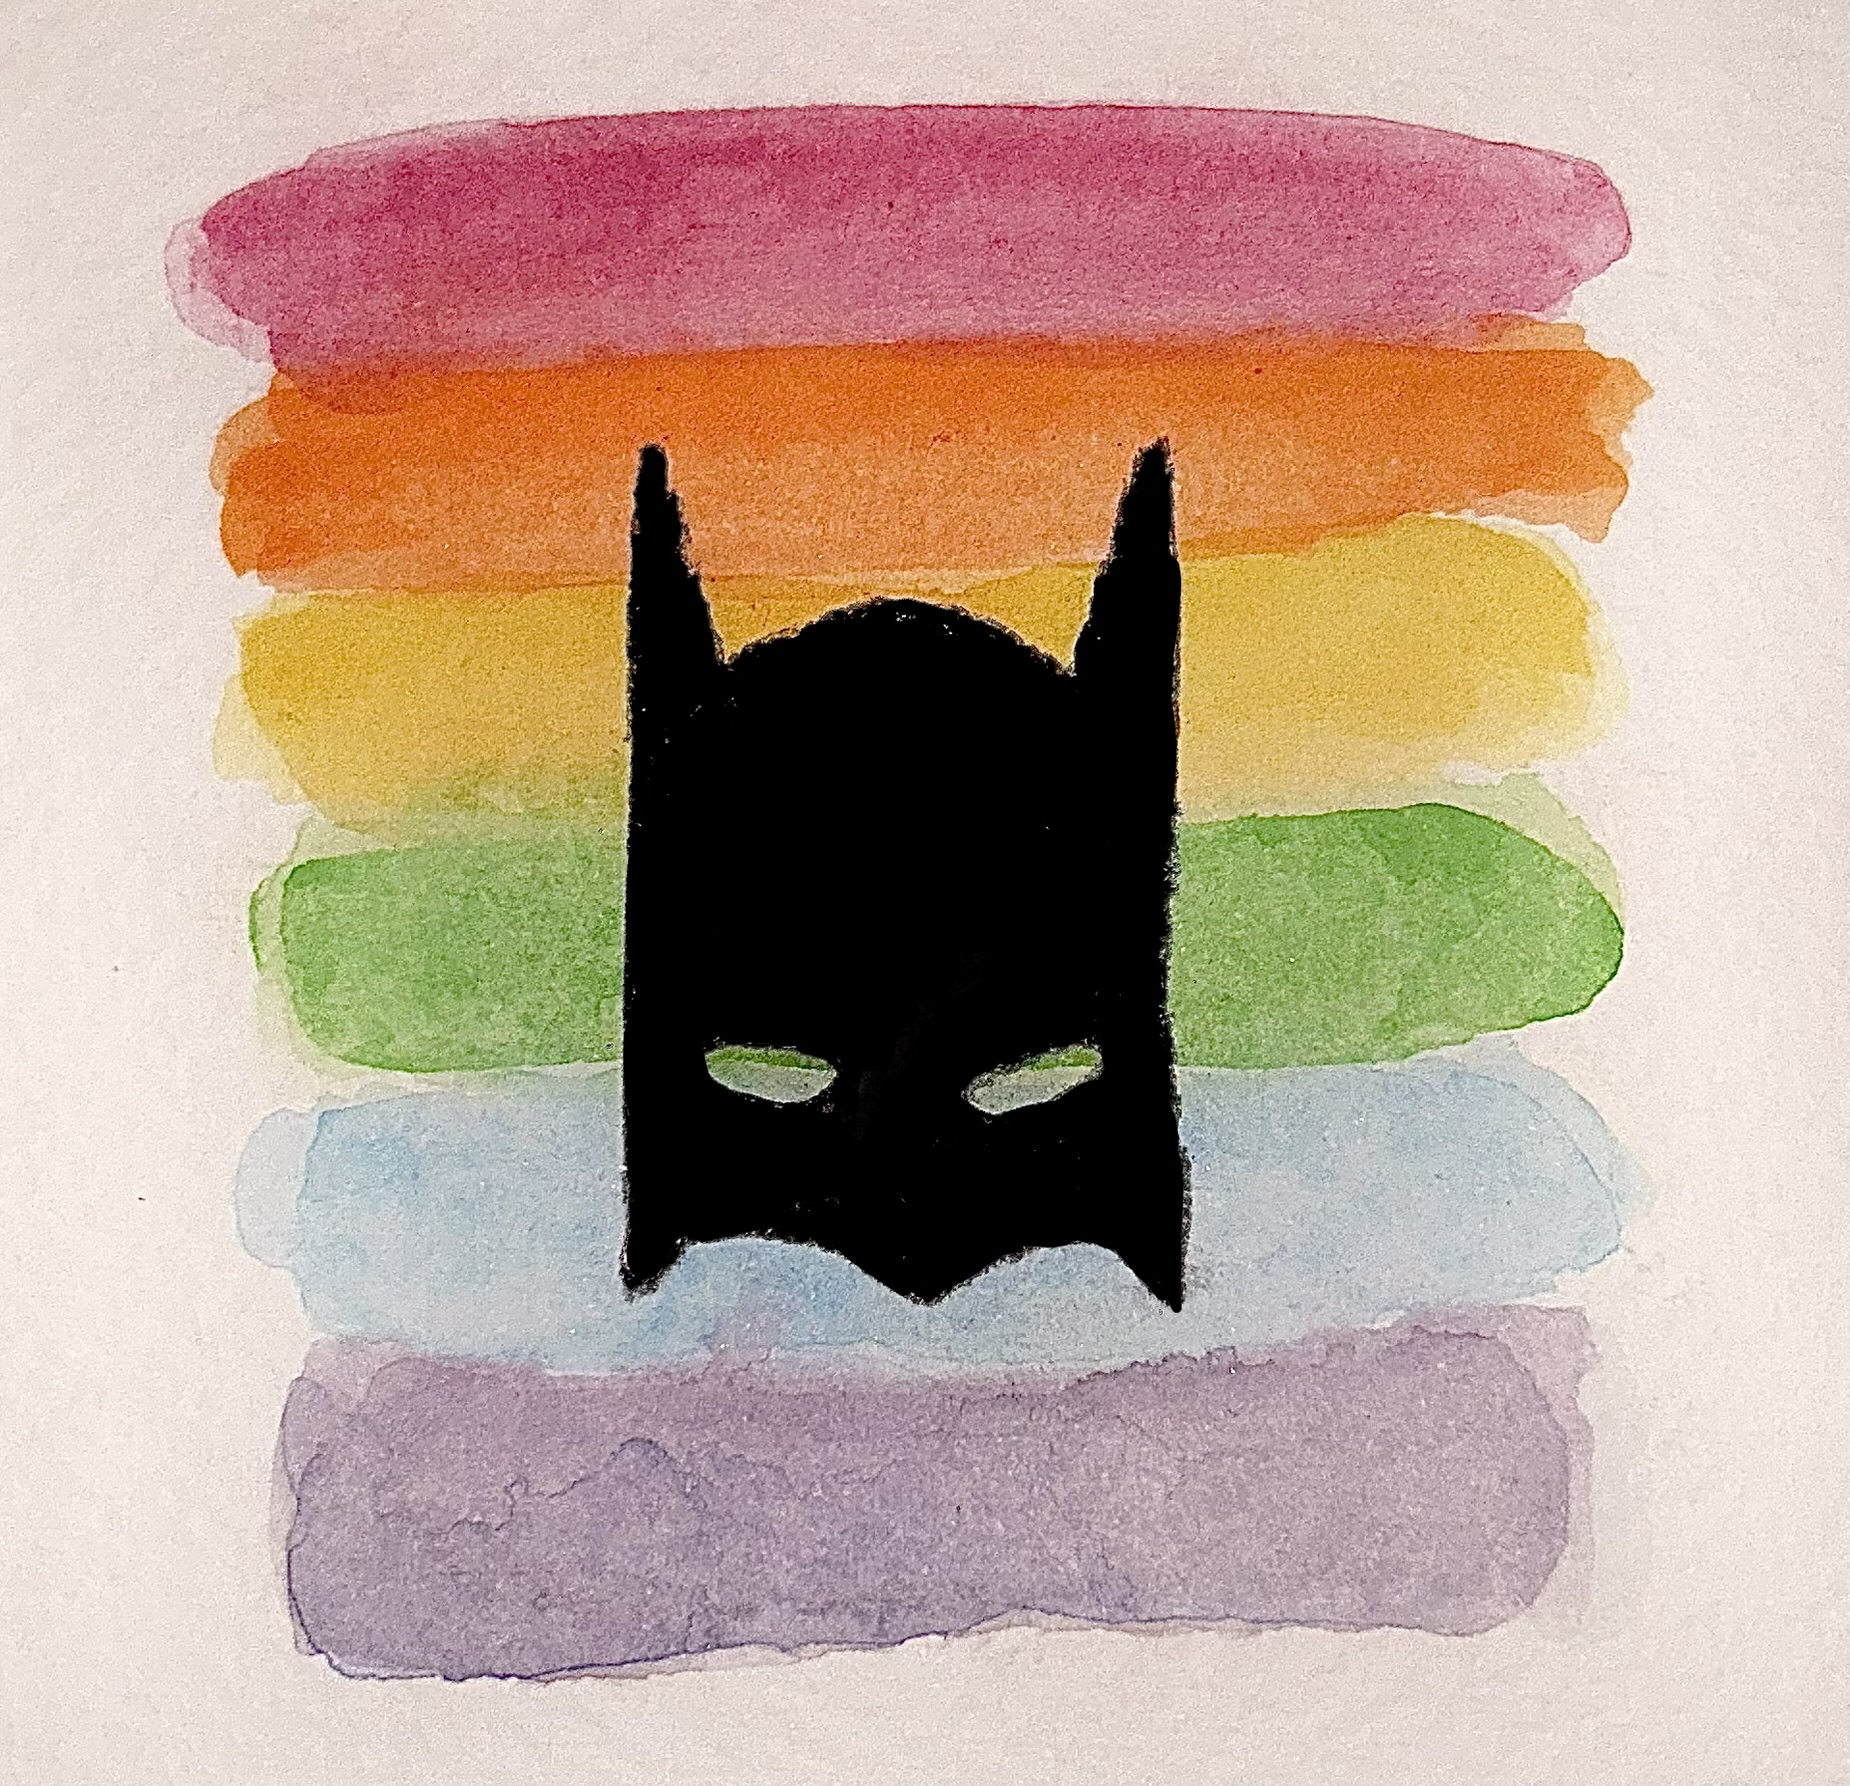 Throughout the past 84 years of Batman media, many writers, directors and actors have shaped the character and his image, but one thing has remained constant: Batman represents queerness.